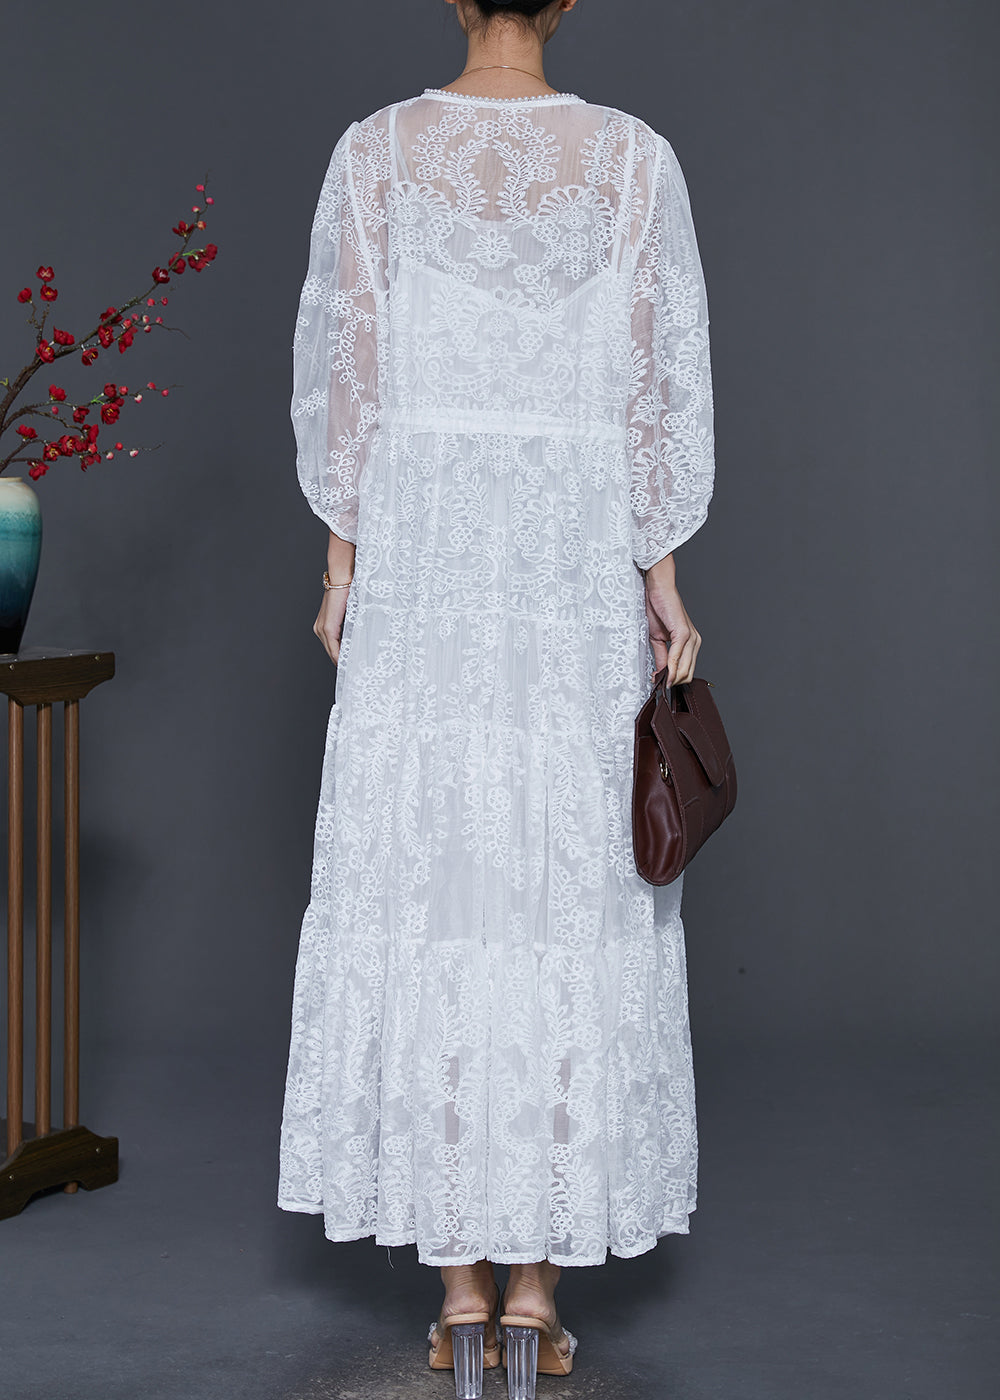 Plus Size White Embroidered Lace Maxi Dresses Spring